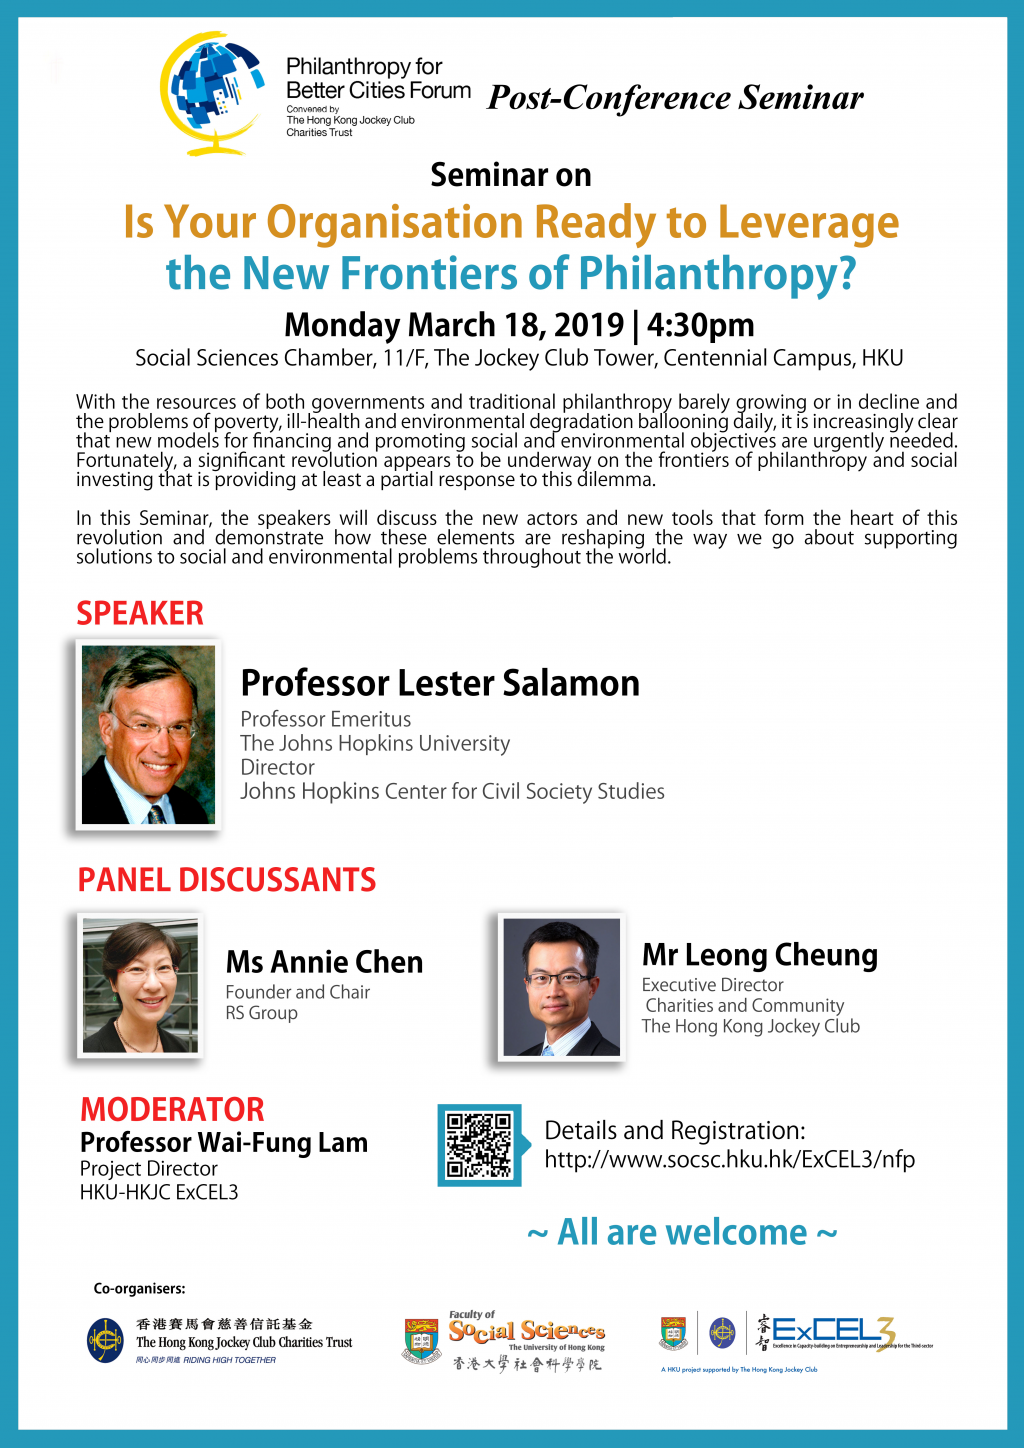 Philanthropy for Better Cities Forum Post-Conference Seminar: Is your Organisation Ready to Leverage the New Frontiers of Philanthropy?